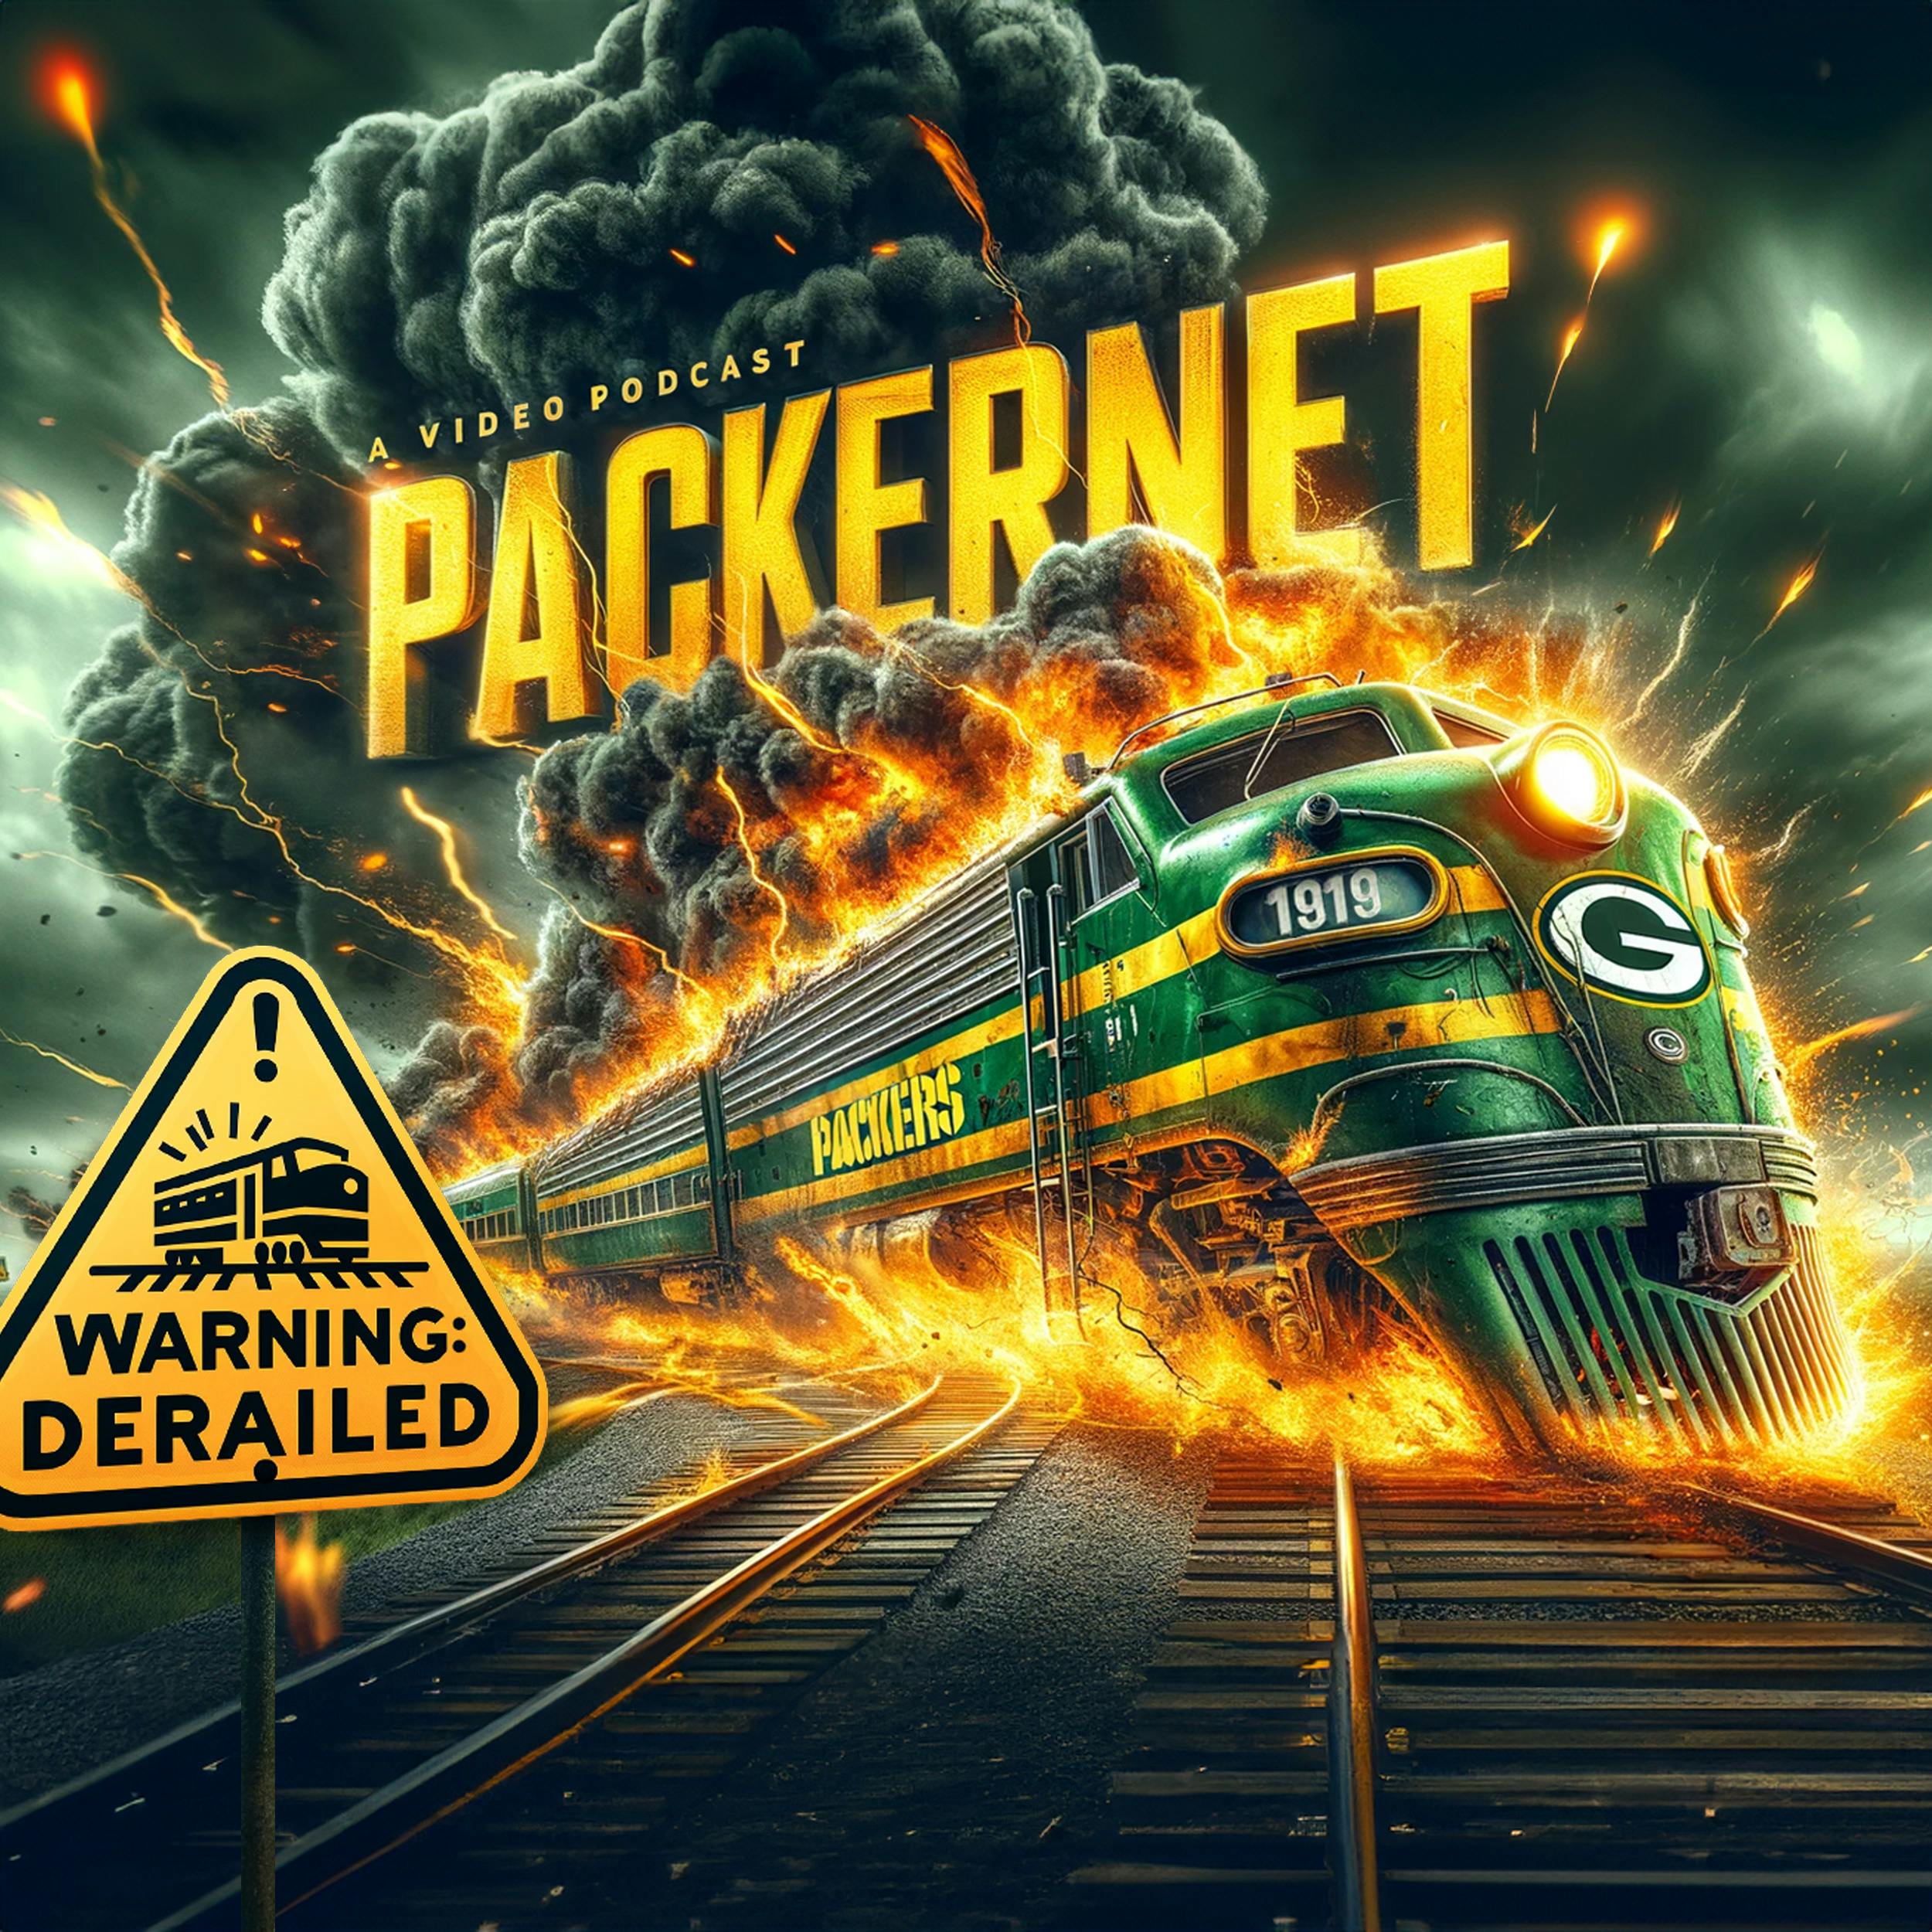 DERAILED: Cat Litter, Draft Memories, Yankoff and Escaped Chickens!